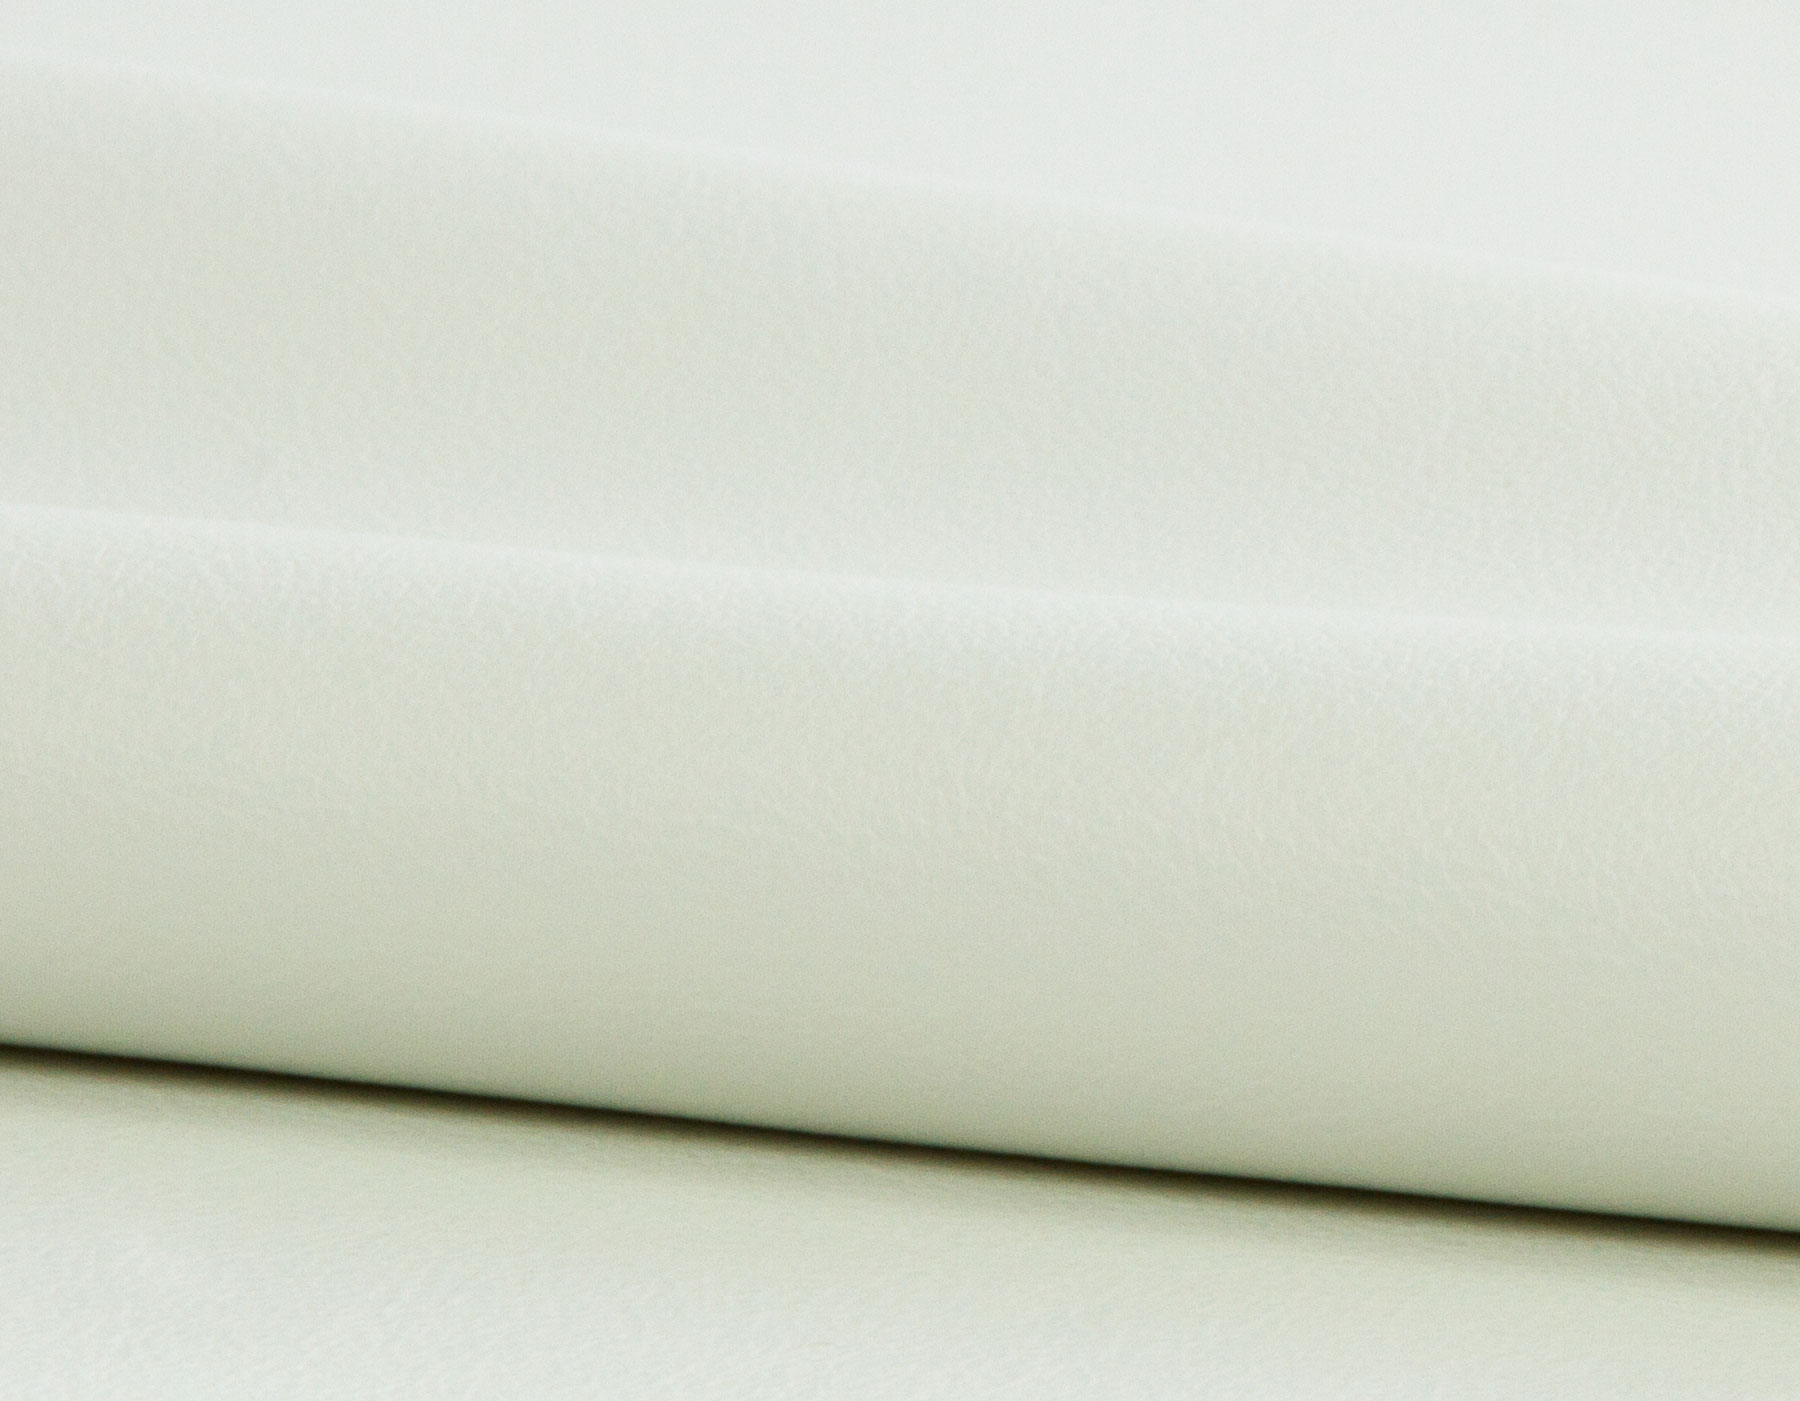 Genuine Leather Upholstery Fabric, White Upholstery Leather